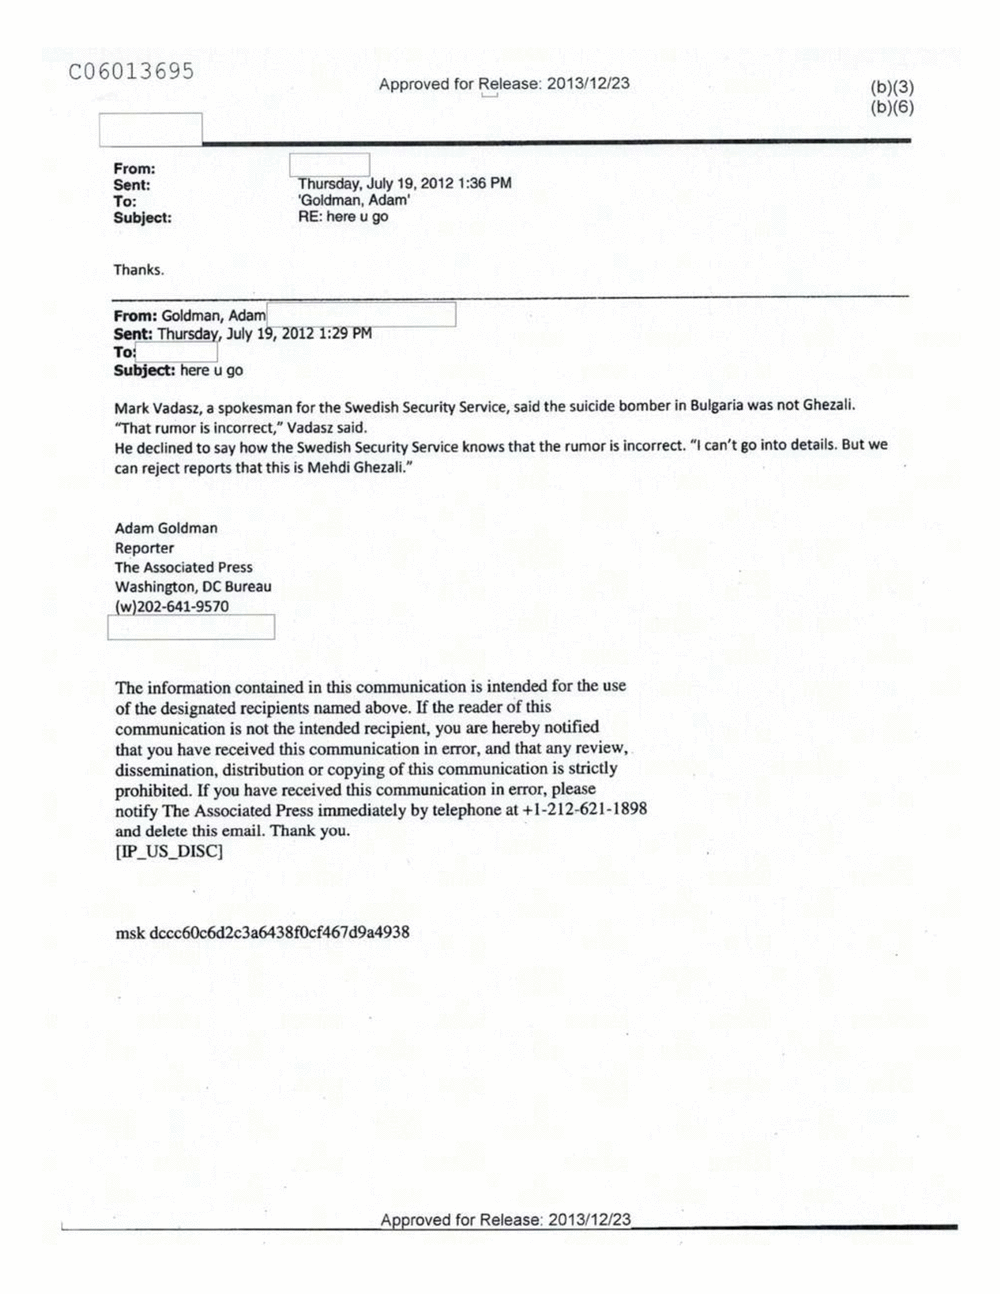 Page 557 from Email Correspondence Between Reporters and CIA Flacks